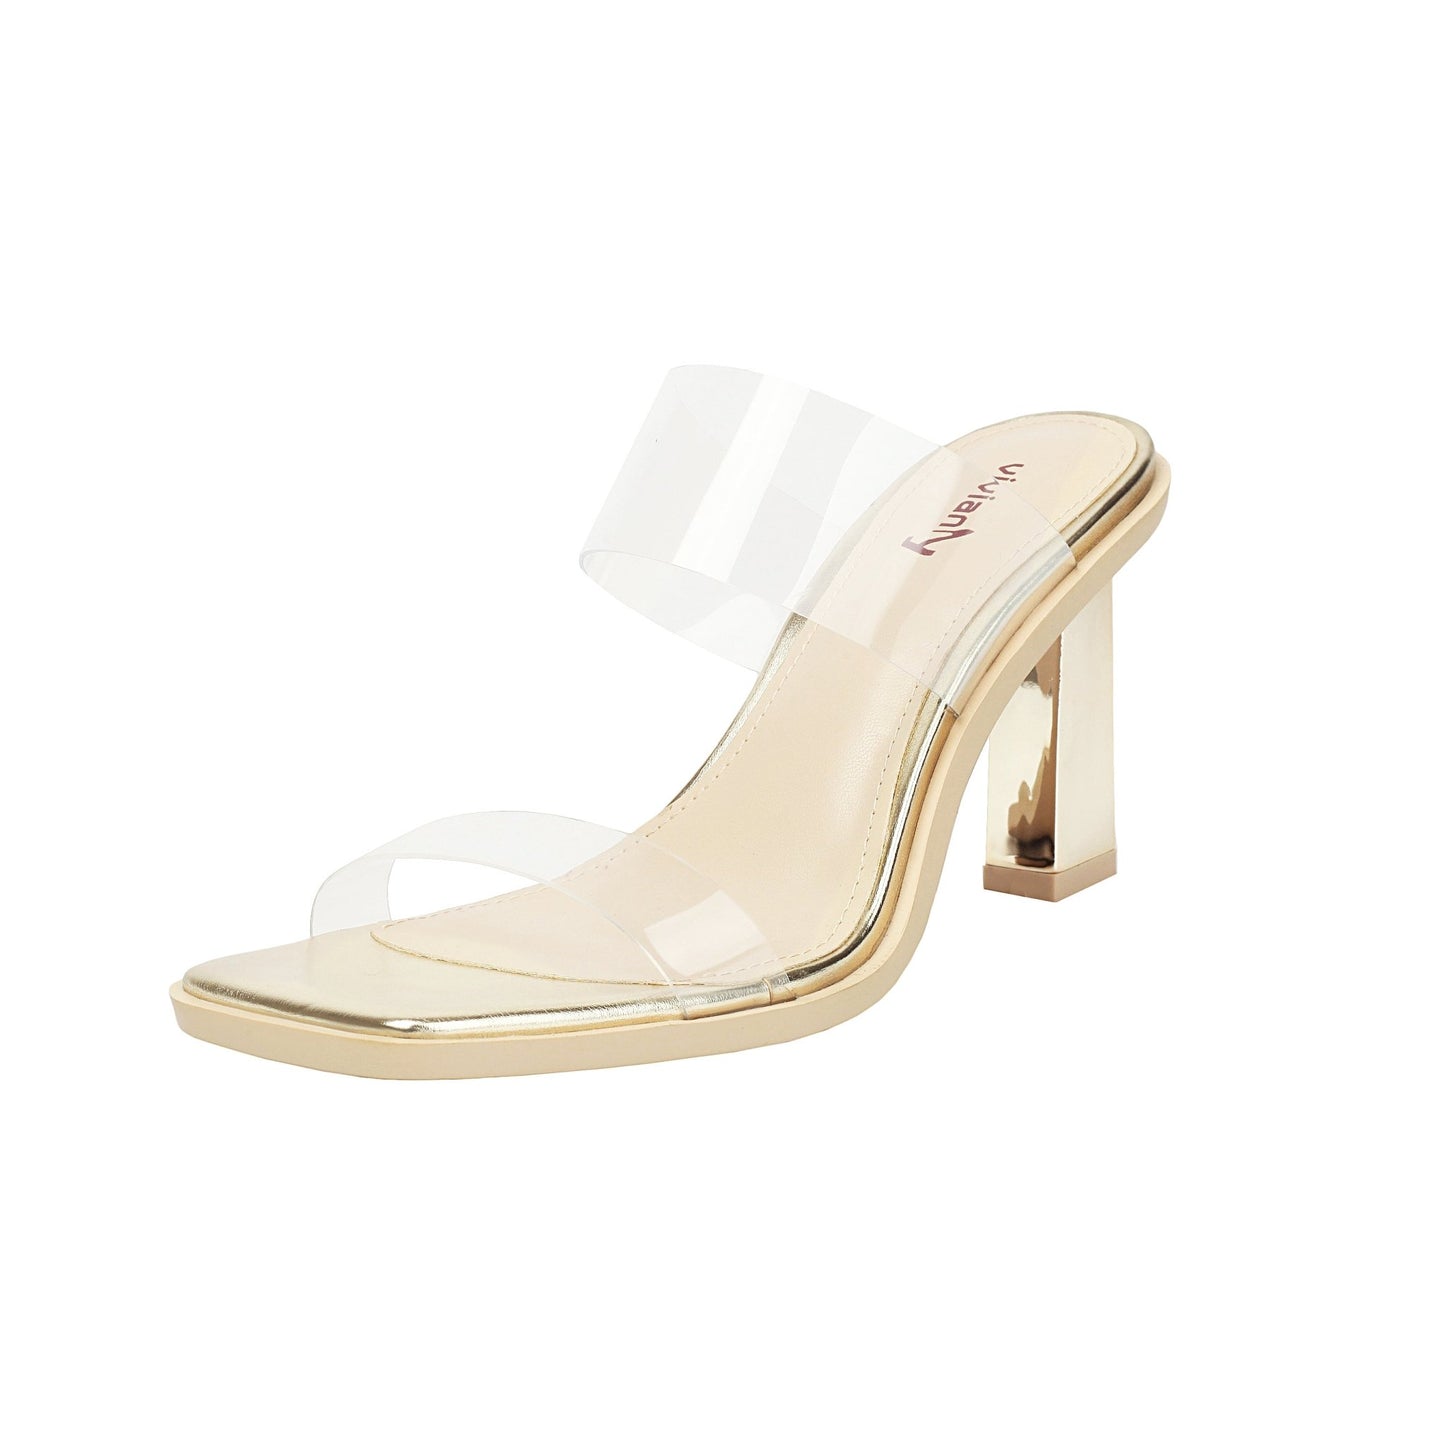 Maya 84 Open Toe Clear Accent Sandal Heels - Vivianly Shoes -